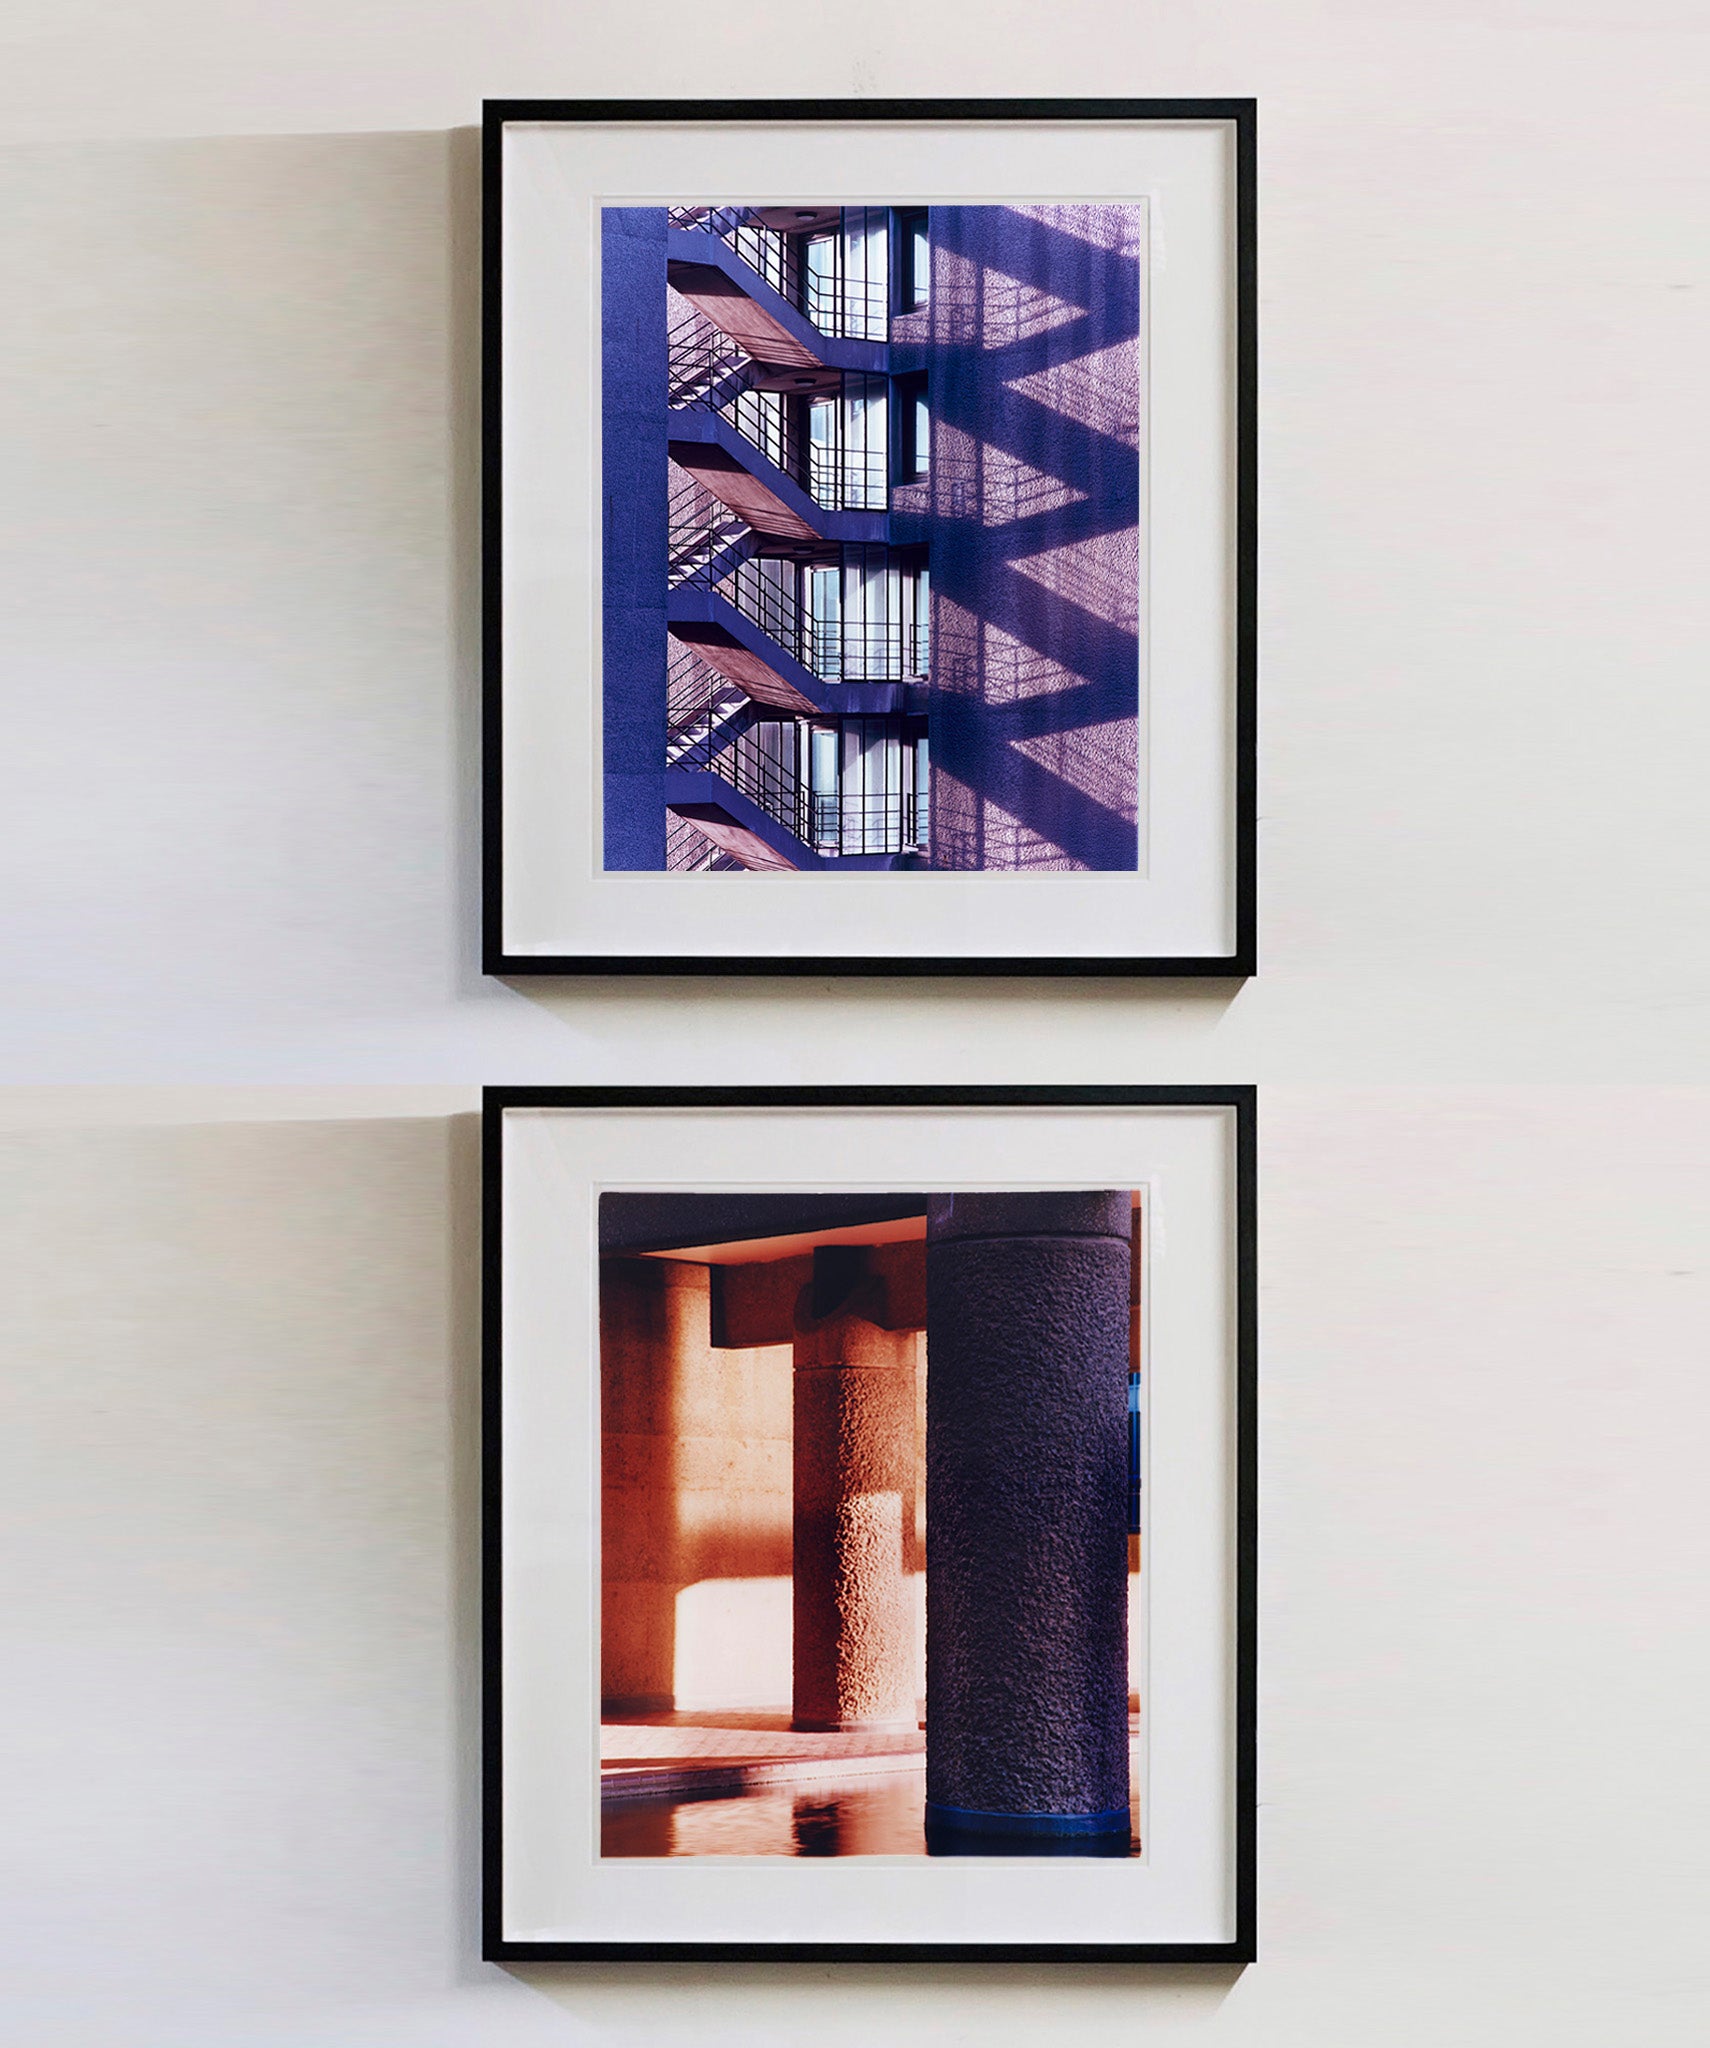 'Brutalist Symphony I' photographed on the Barbican Estate. There is a subtle beauty in the light and colour of this conceptual architectural photograph of the famous London Brutalist landmark.